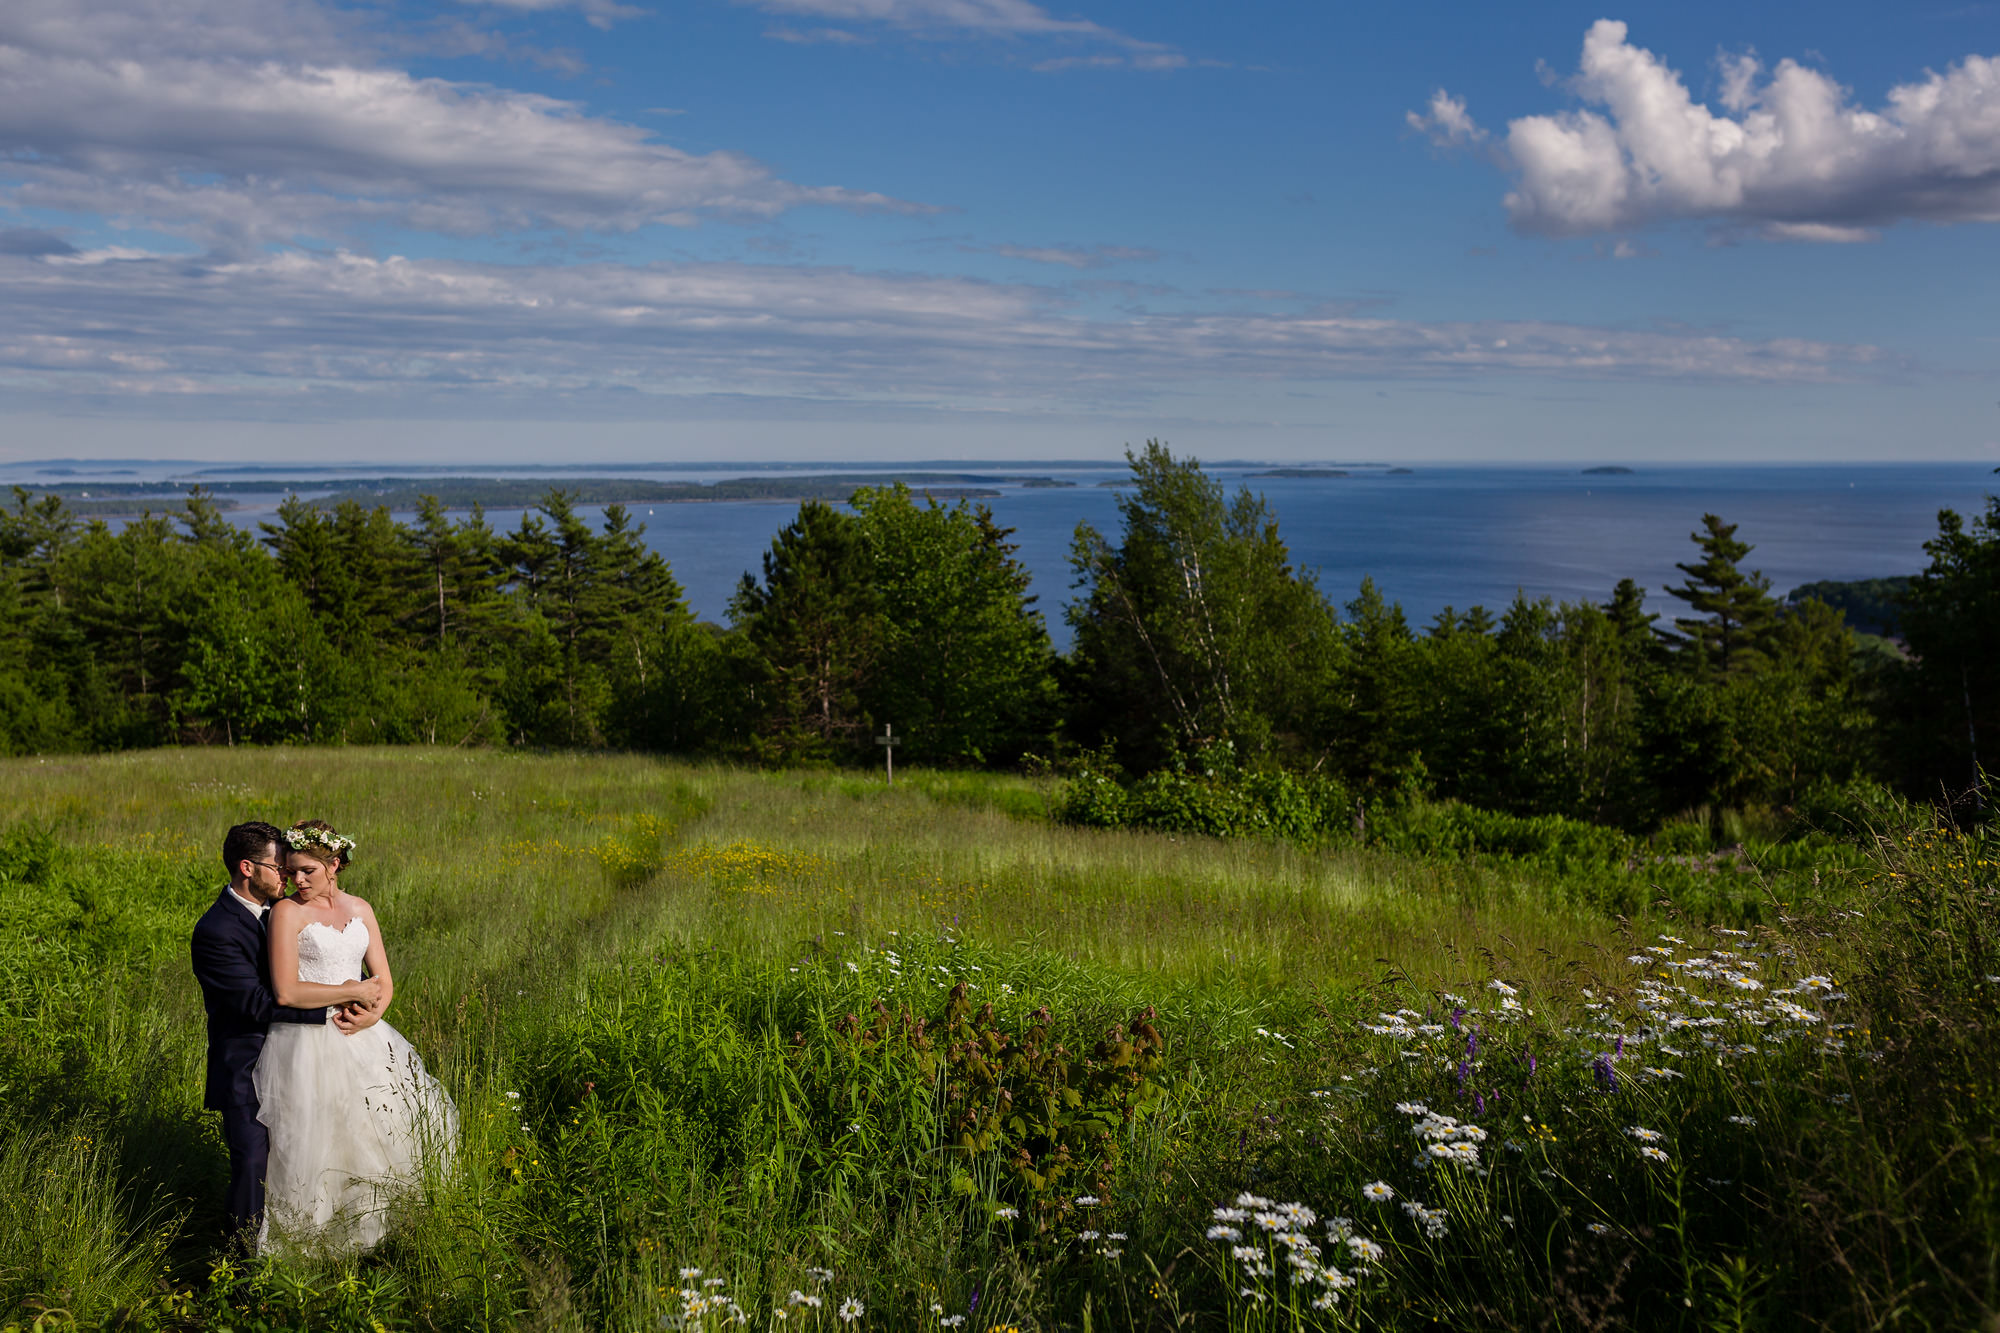 Beautiful wedding portraits taken on the Point Lookout property in Northport, Maine